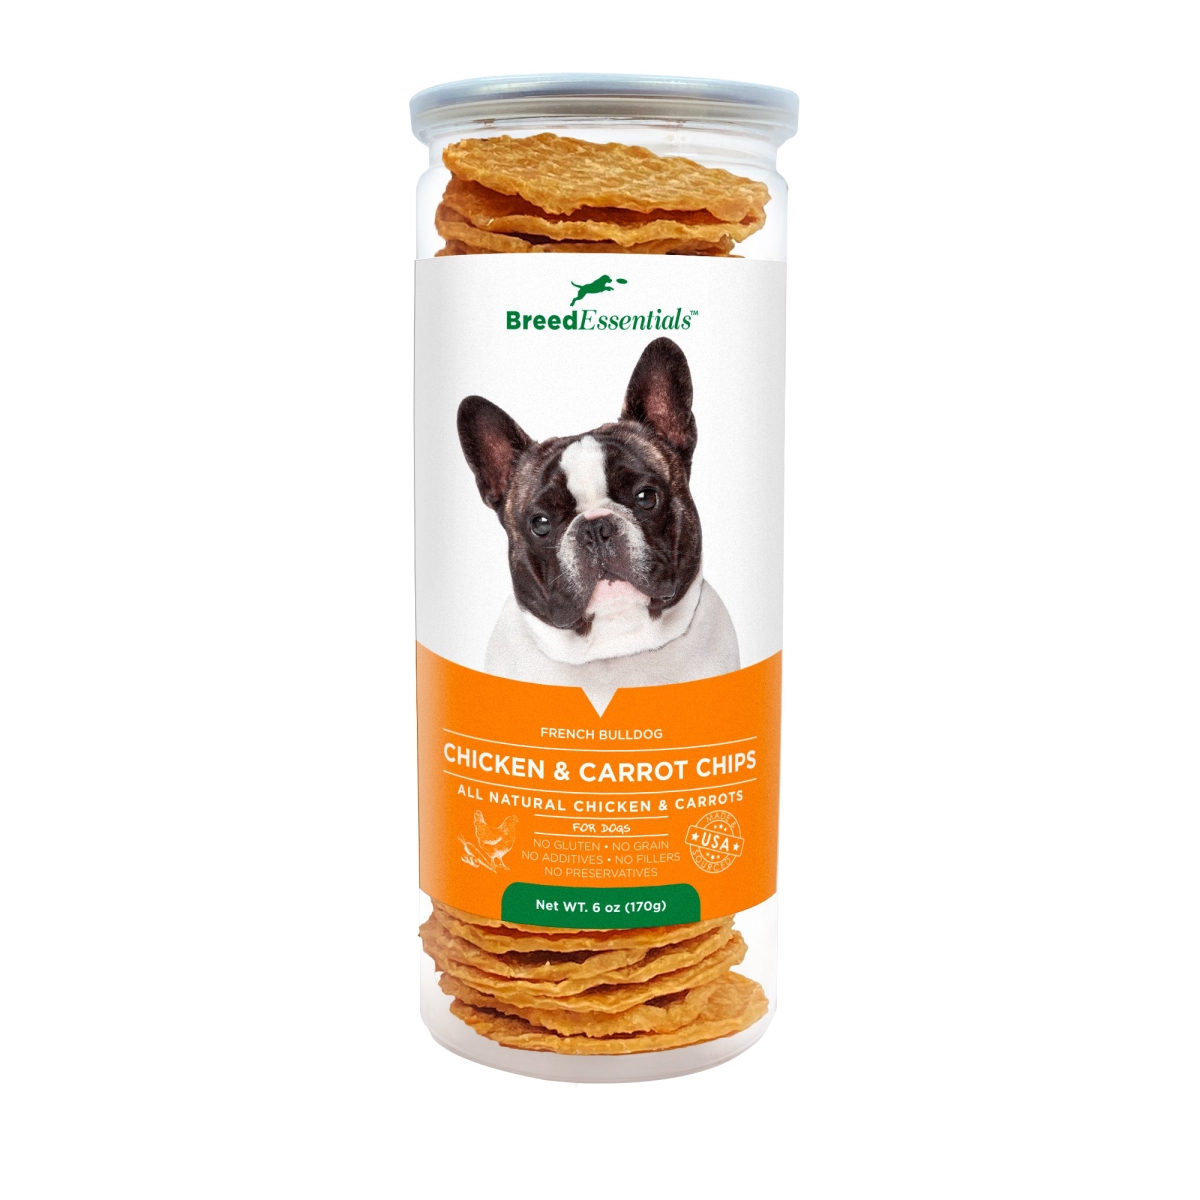 Picture of Breed Essentials 197247000686 6 oz Chicken & Carrot Chips - French Bulldog